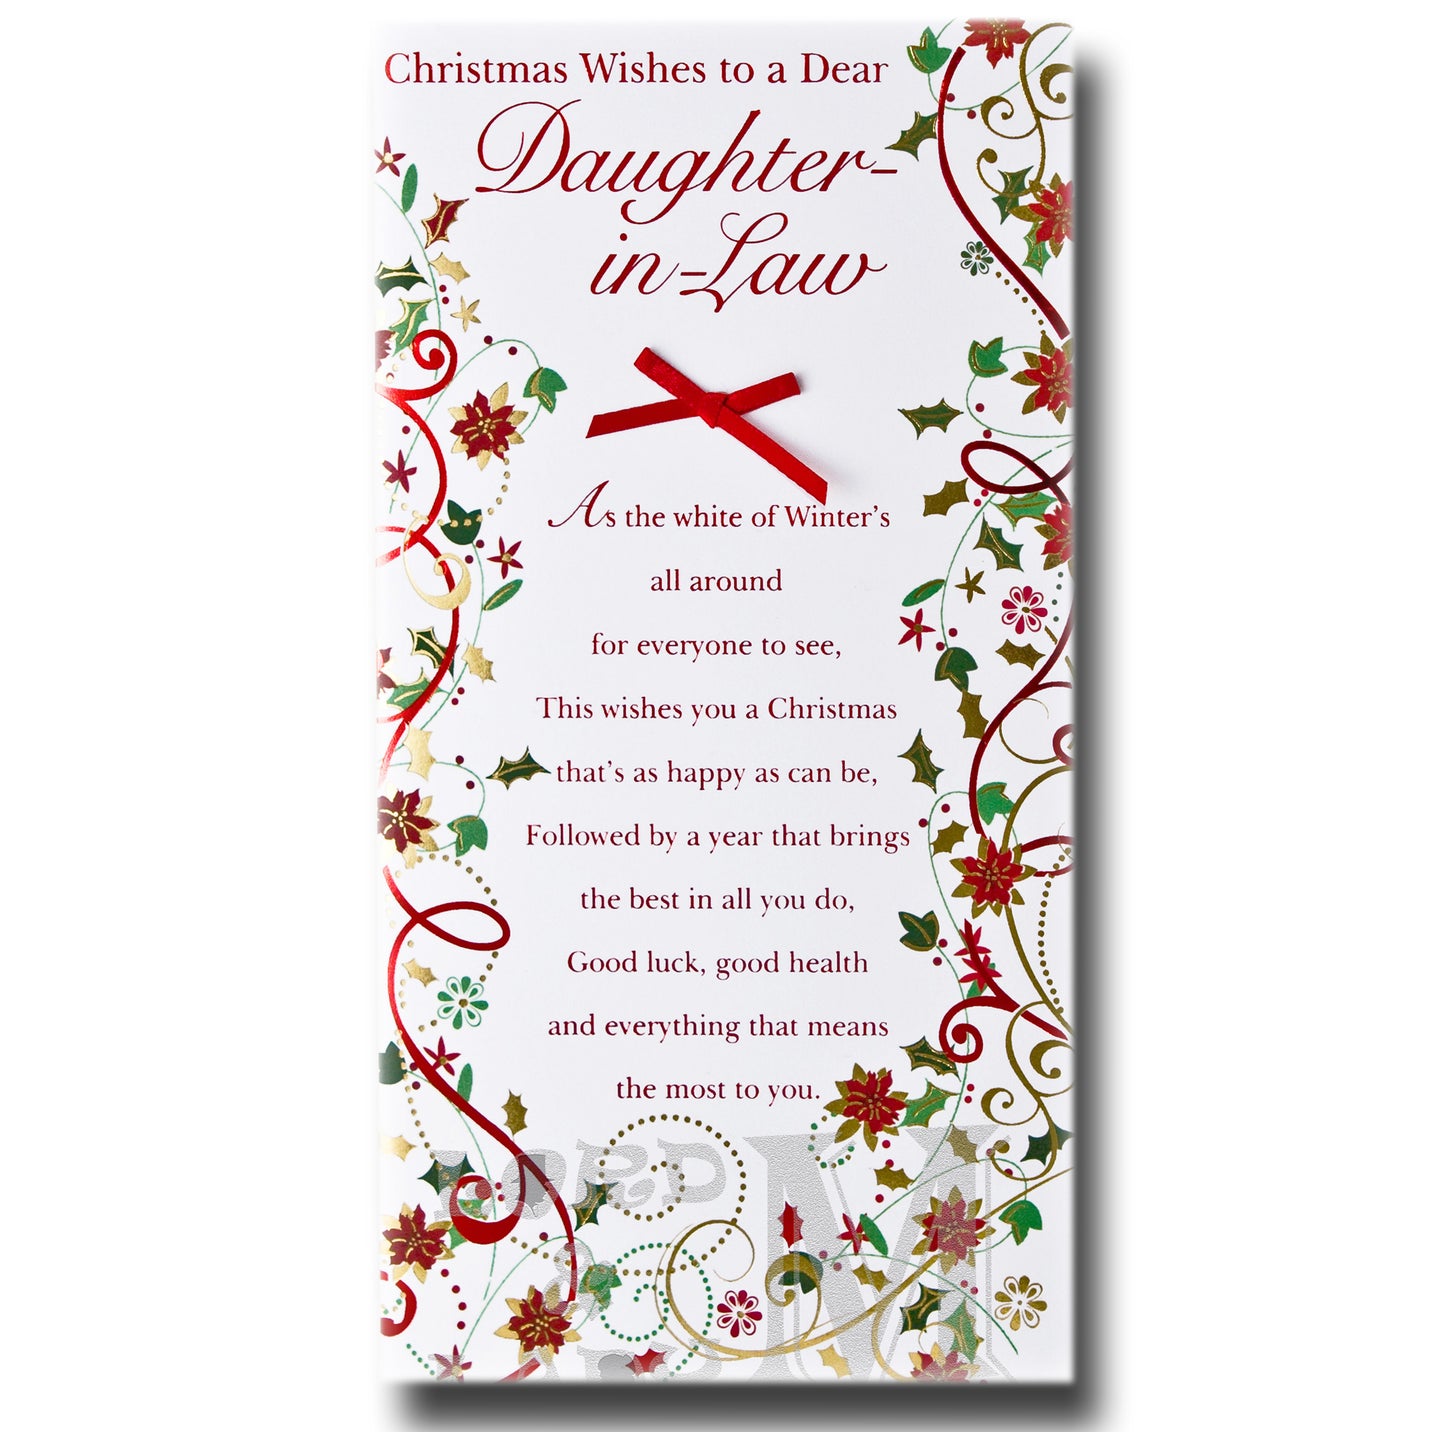 23cm - Christmas Wishes To A Dear Daughter-in-Law